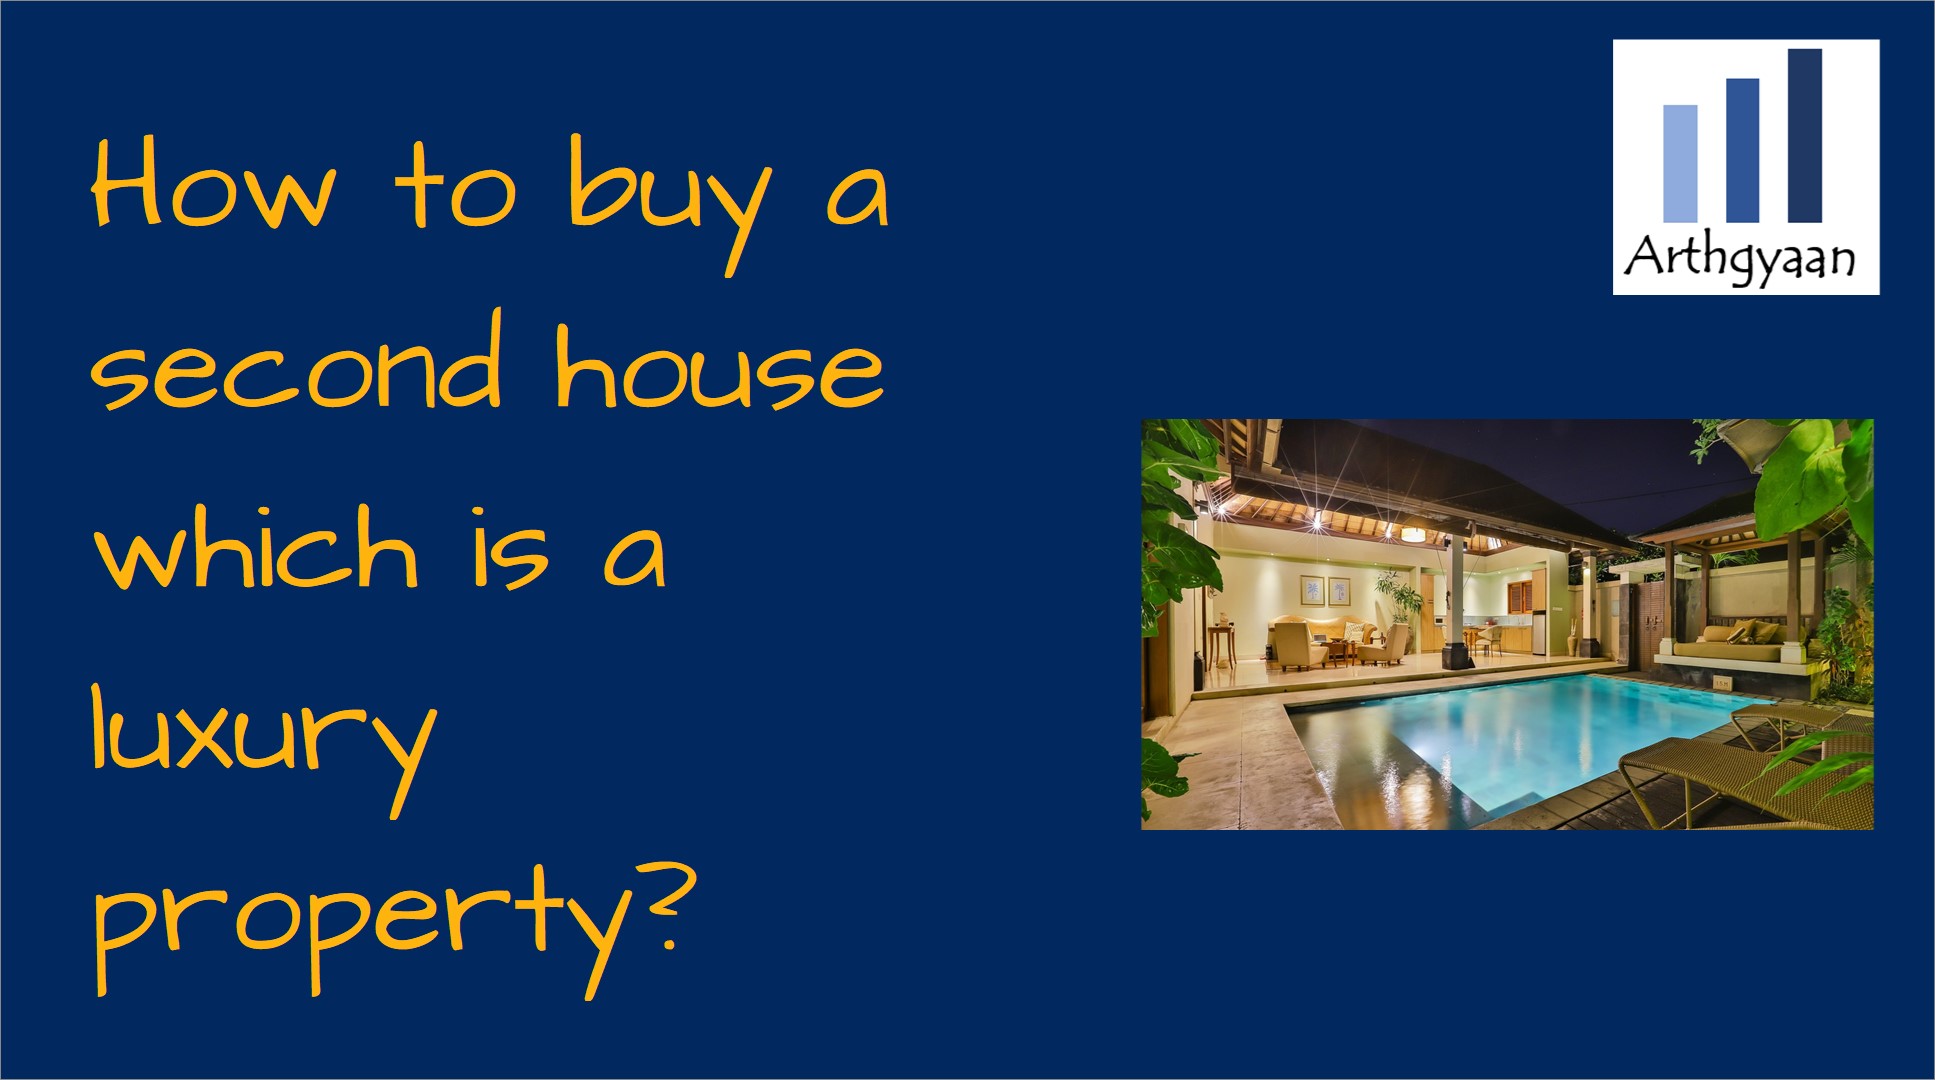 How to buy a second house which is a luxury property?